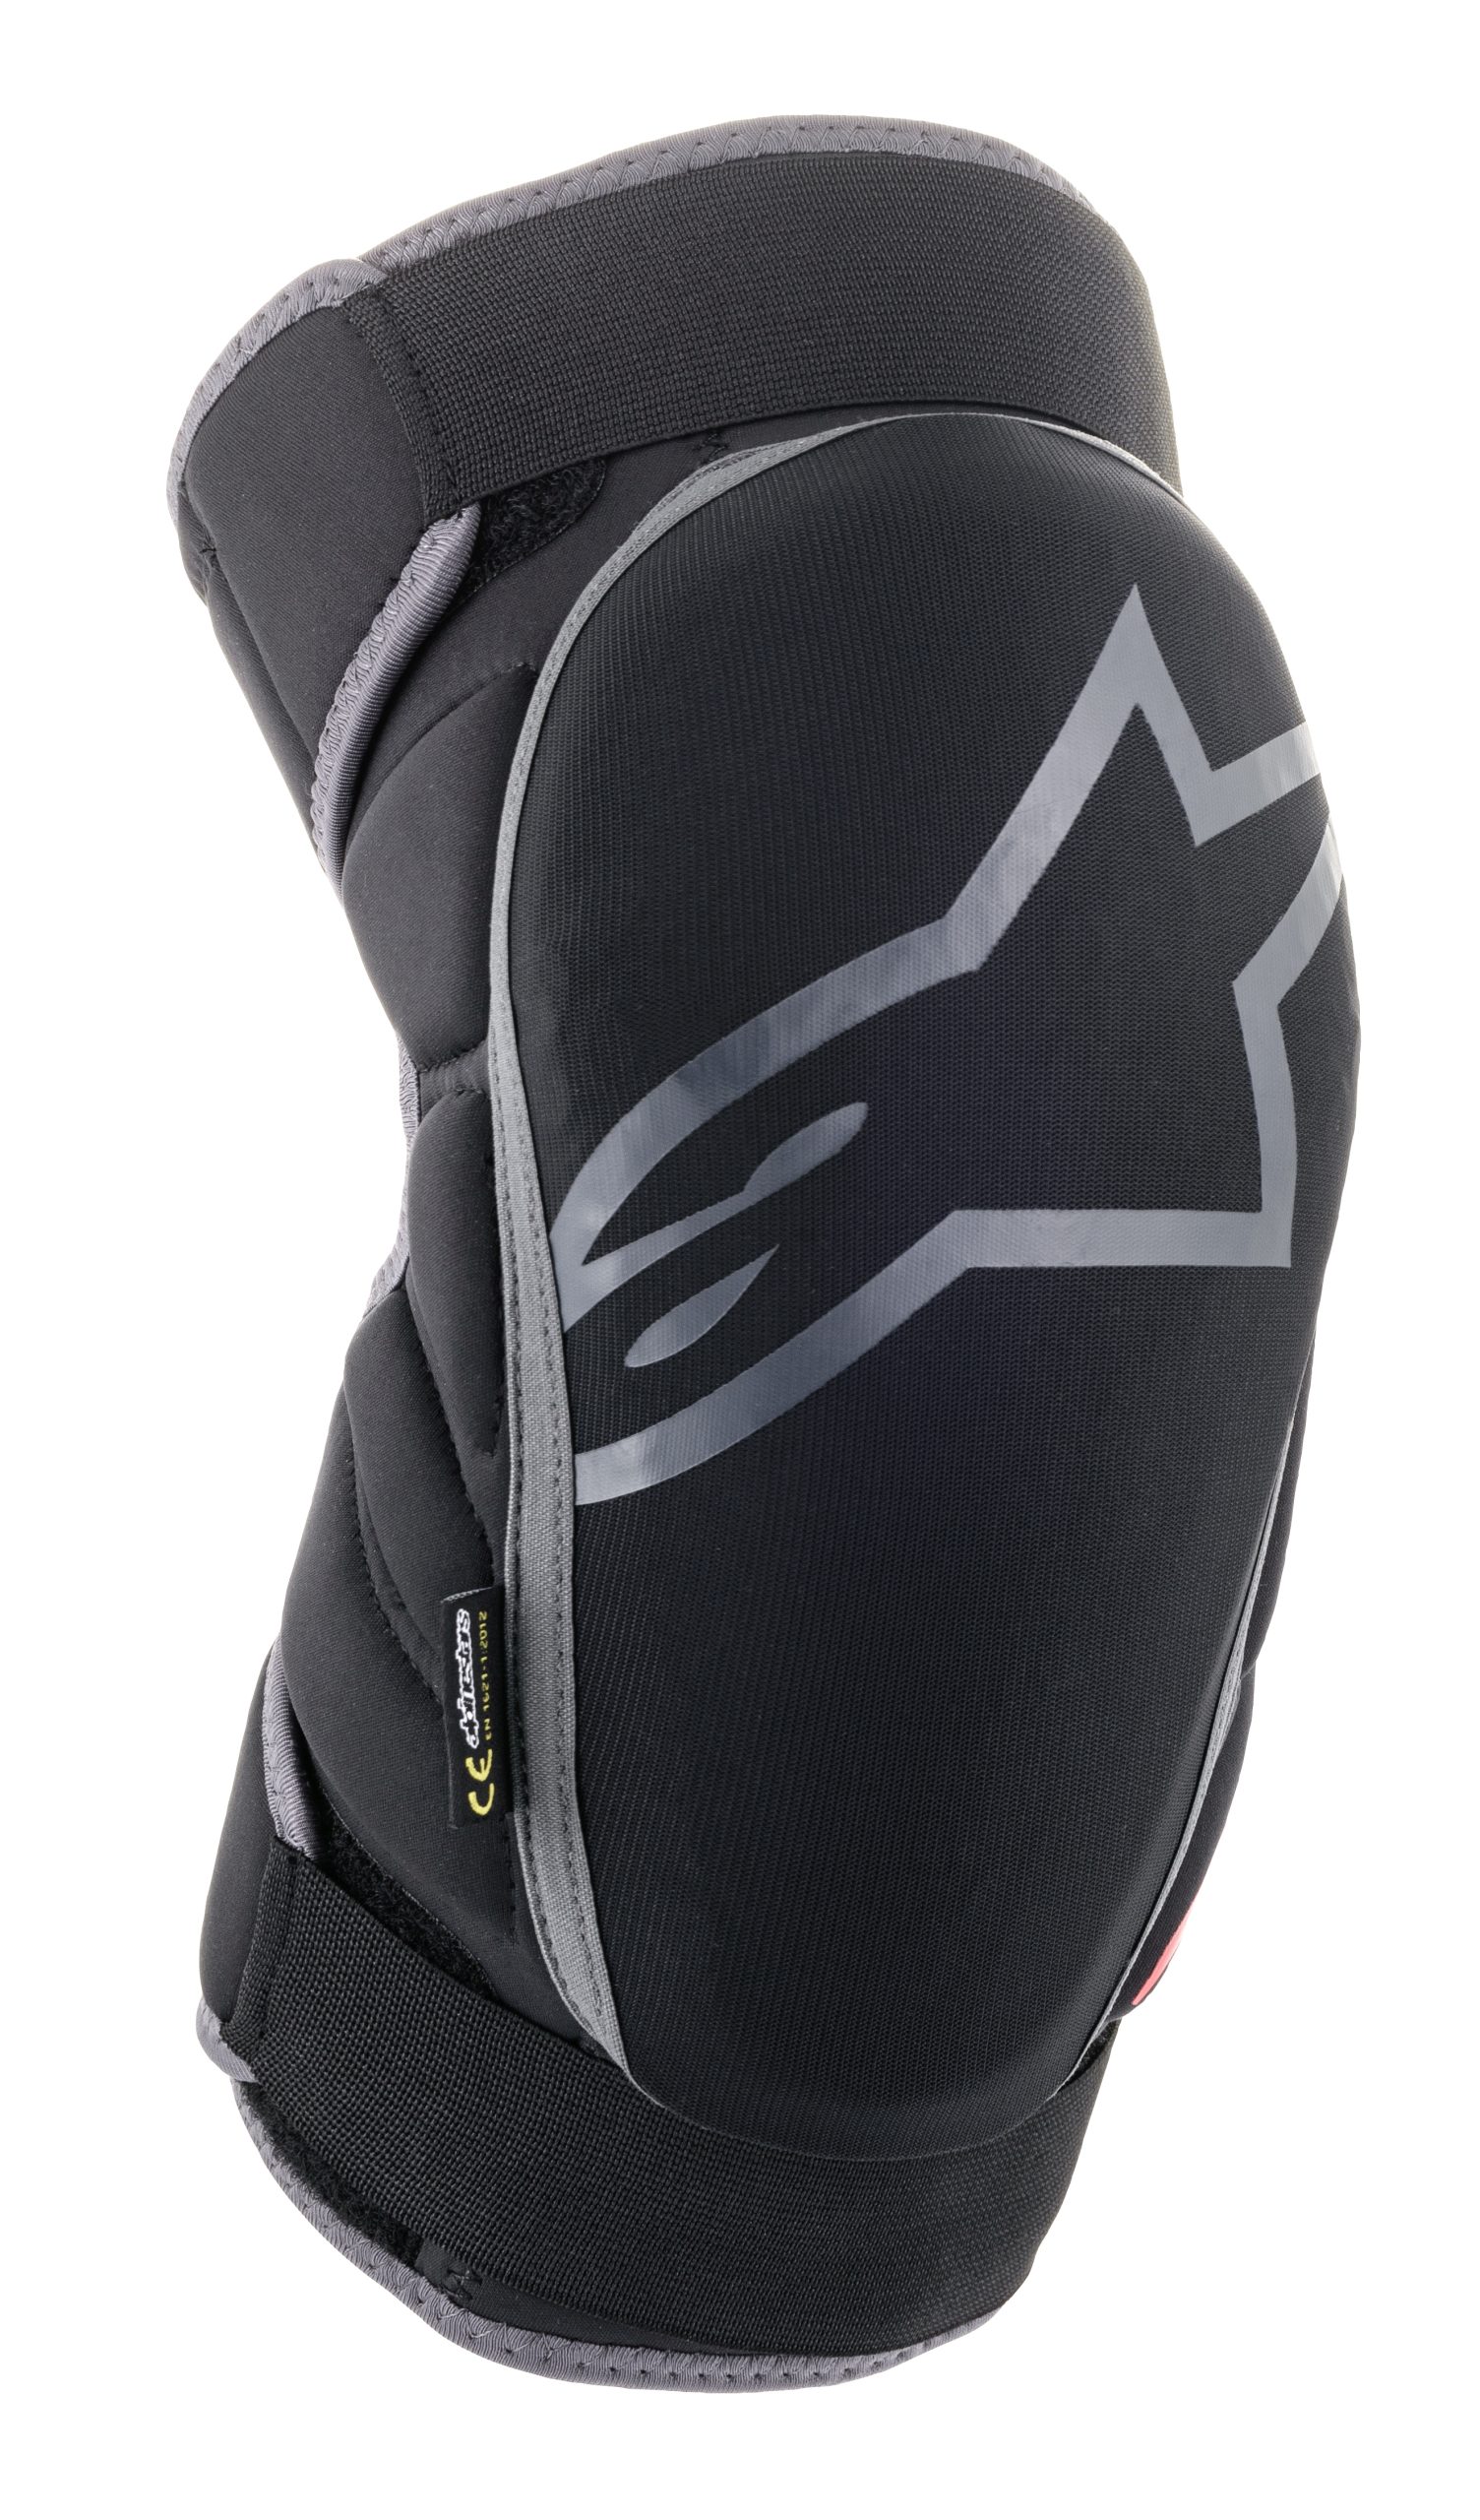 ALPINESTARS VECTOR KNEE PROTECTOR BLACK ANTHRACITE RED SIZE S/M